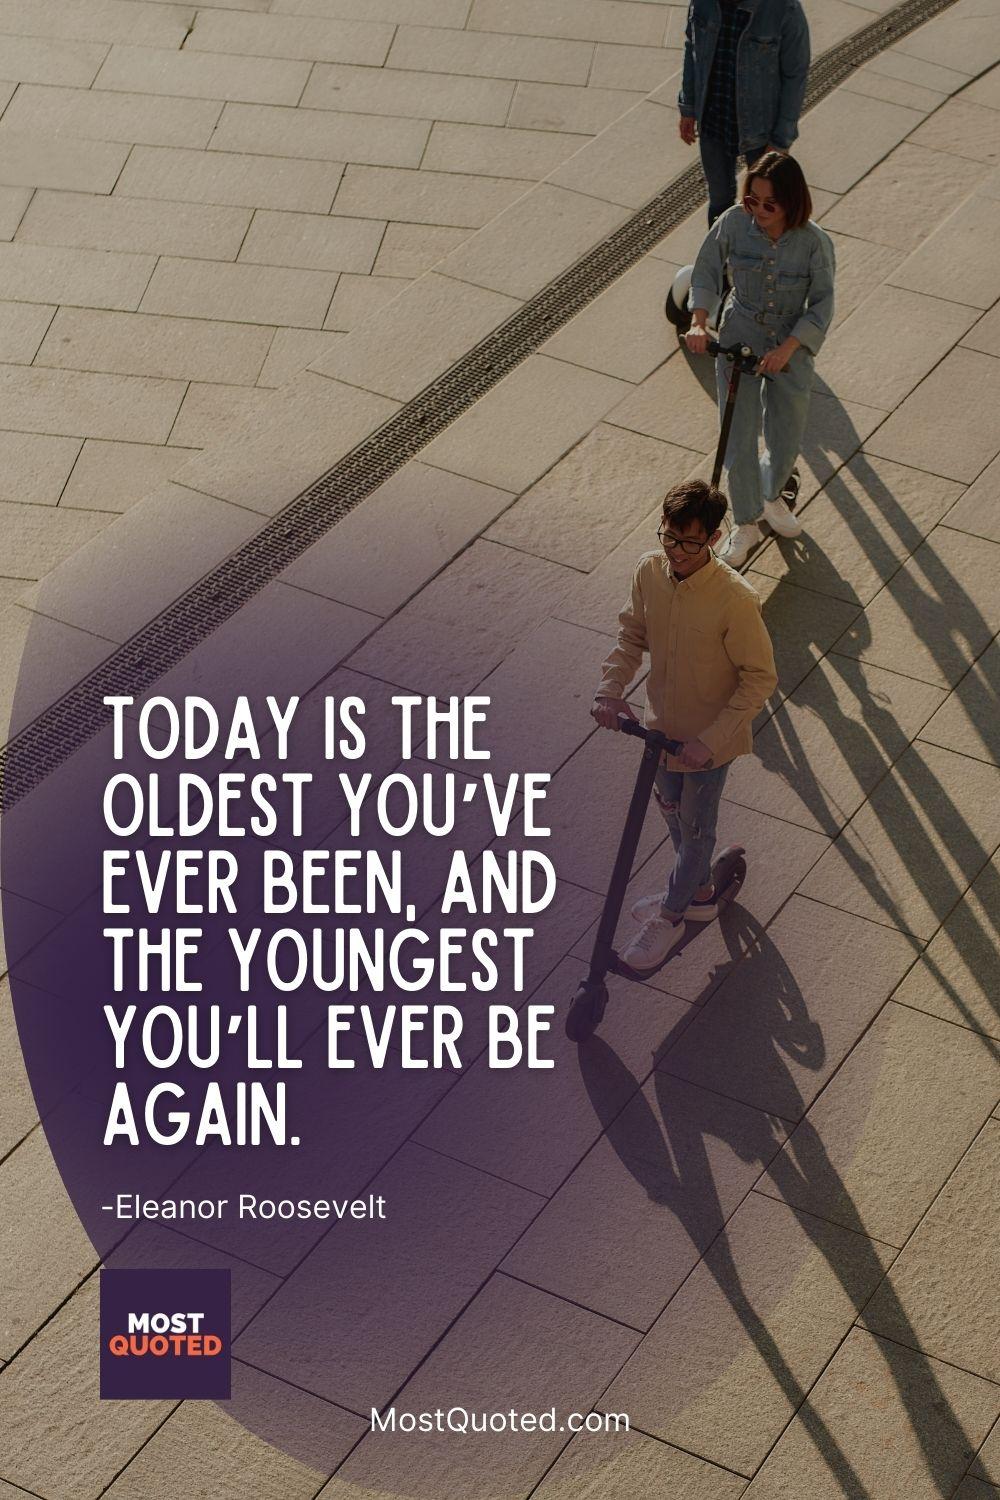 Today is the oldest you’ve ever been, and the youngest you’ll ever be again. - Eleanor Roosevelt